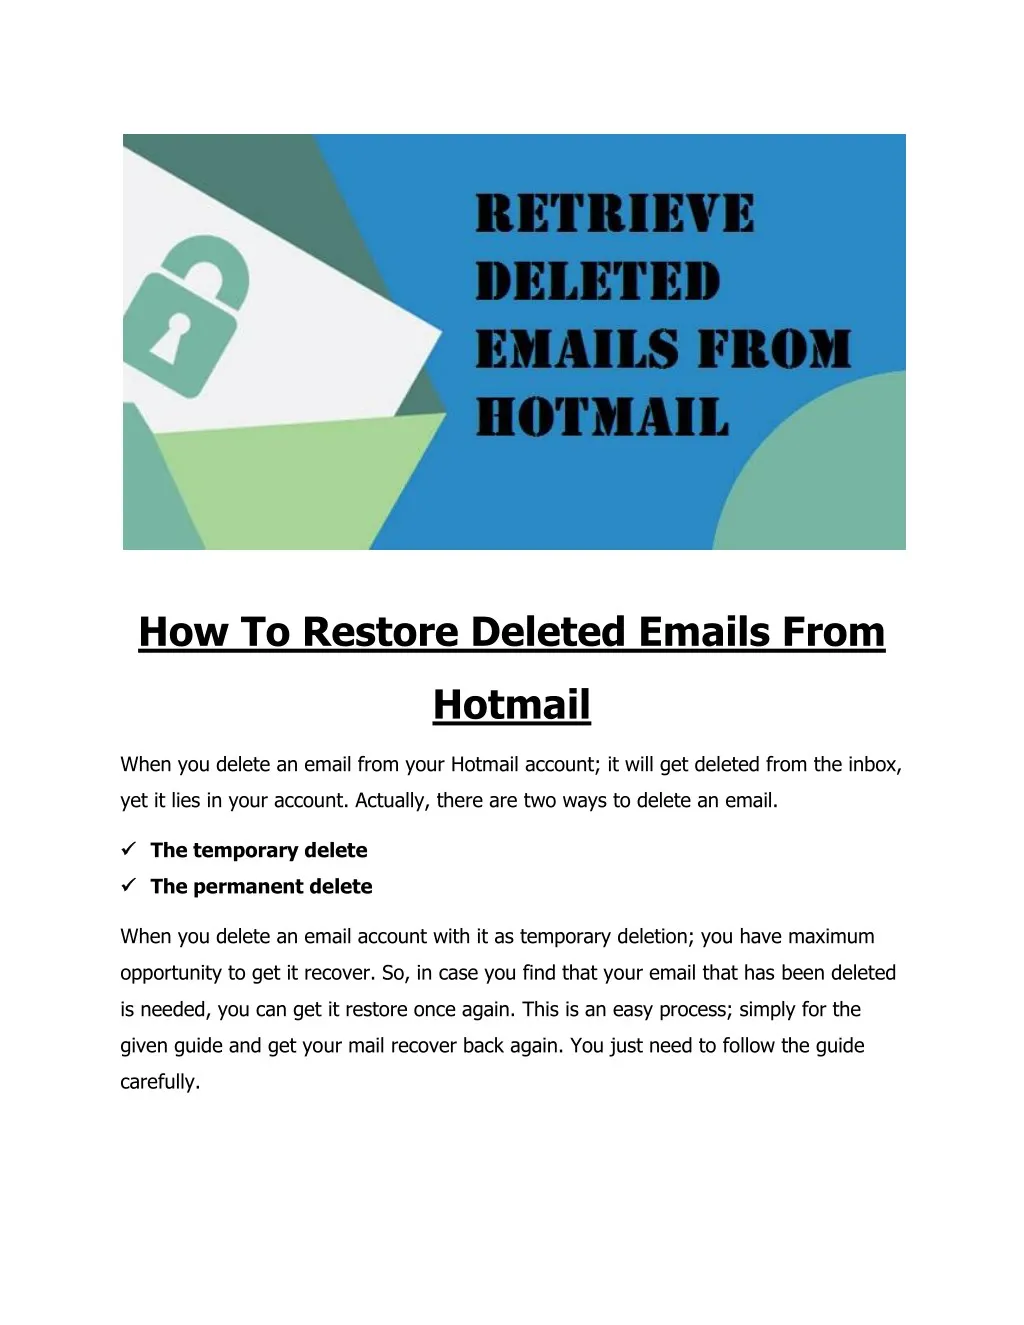 how to restore deleted emails from